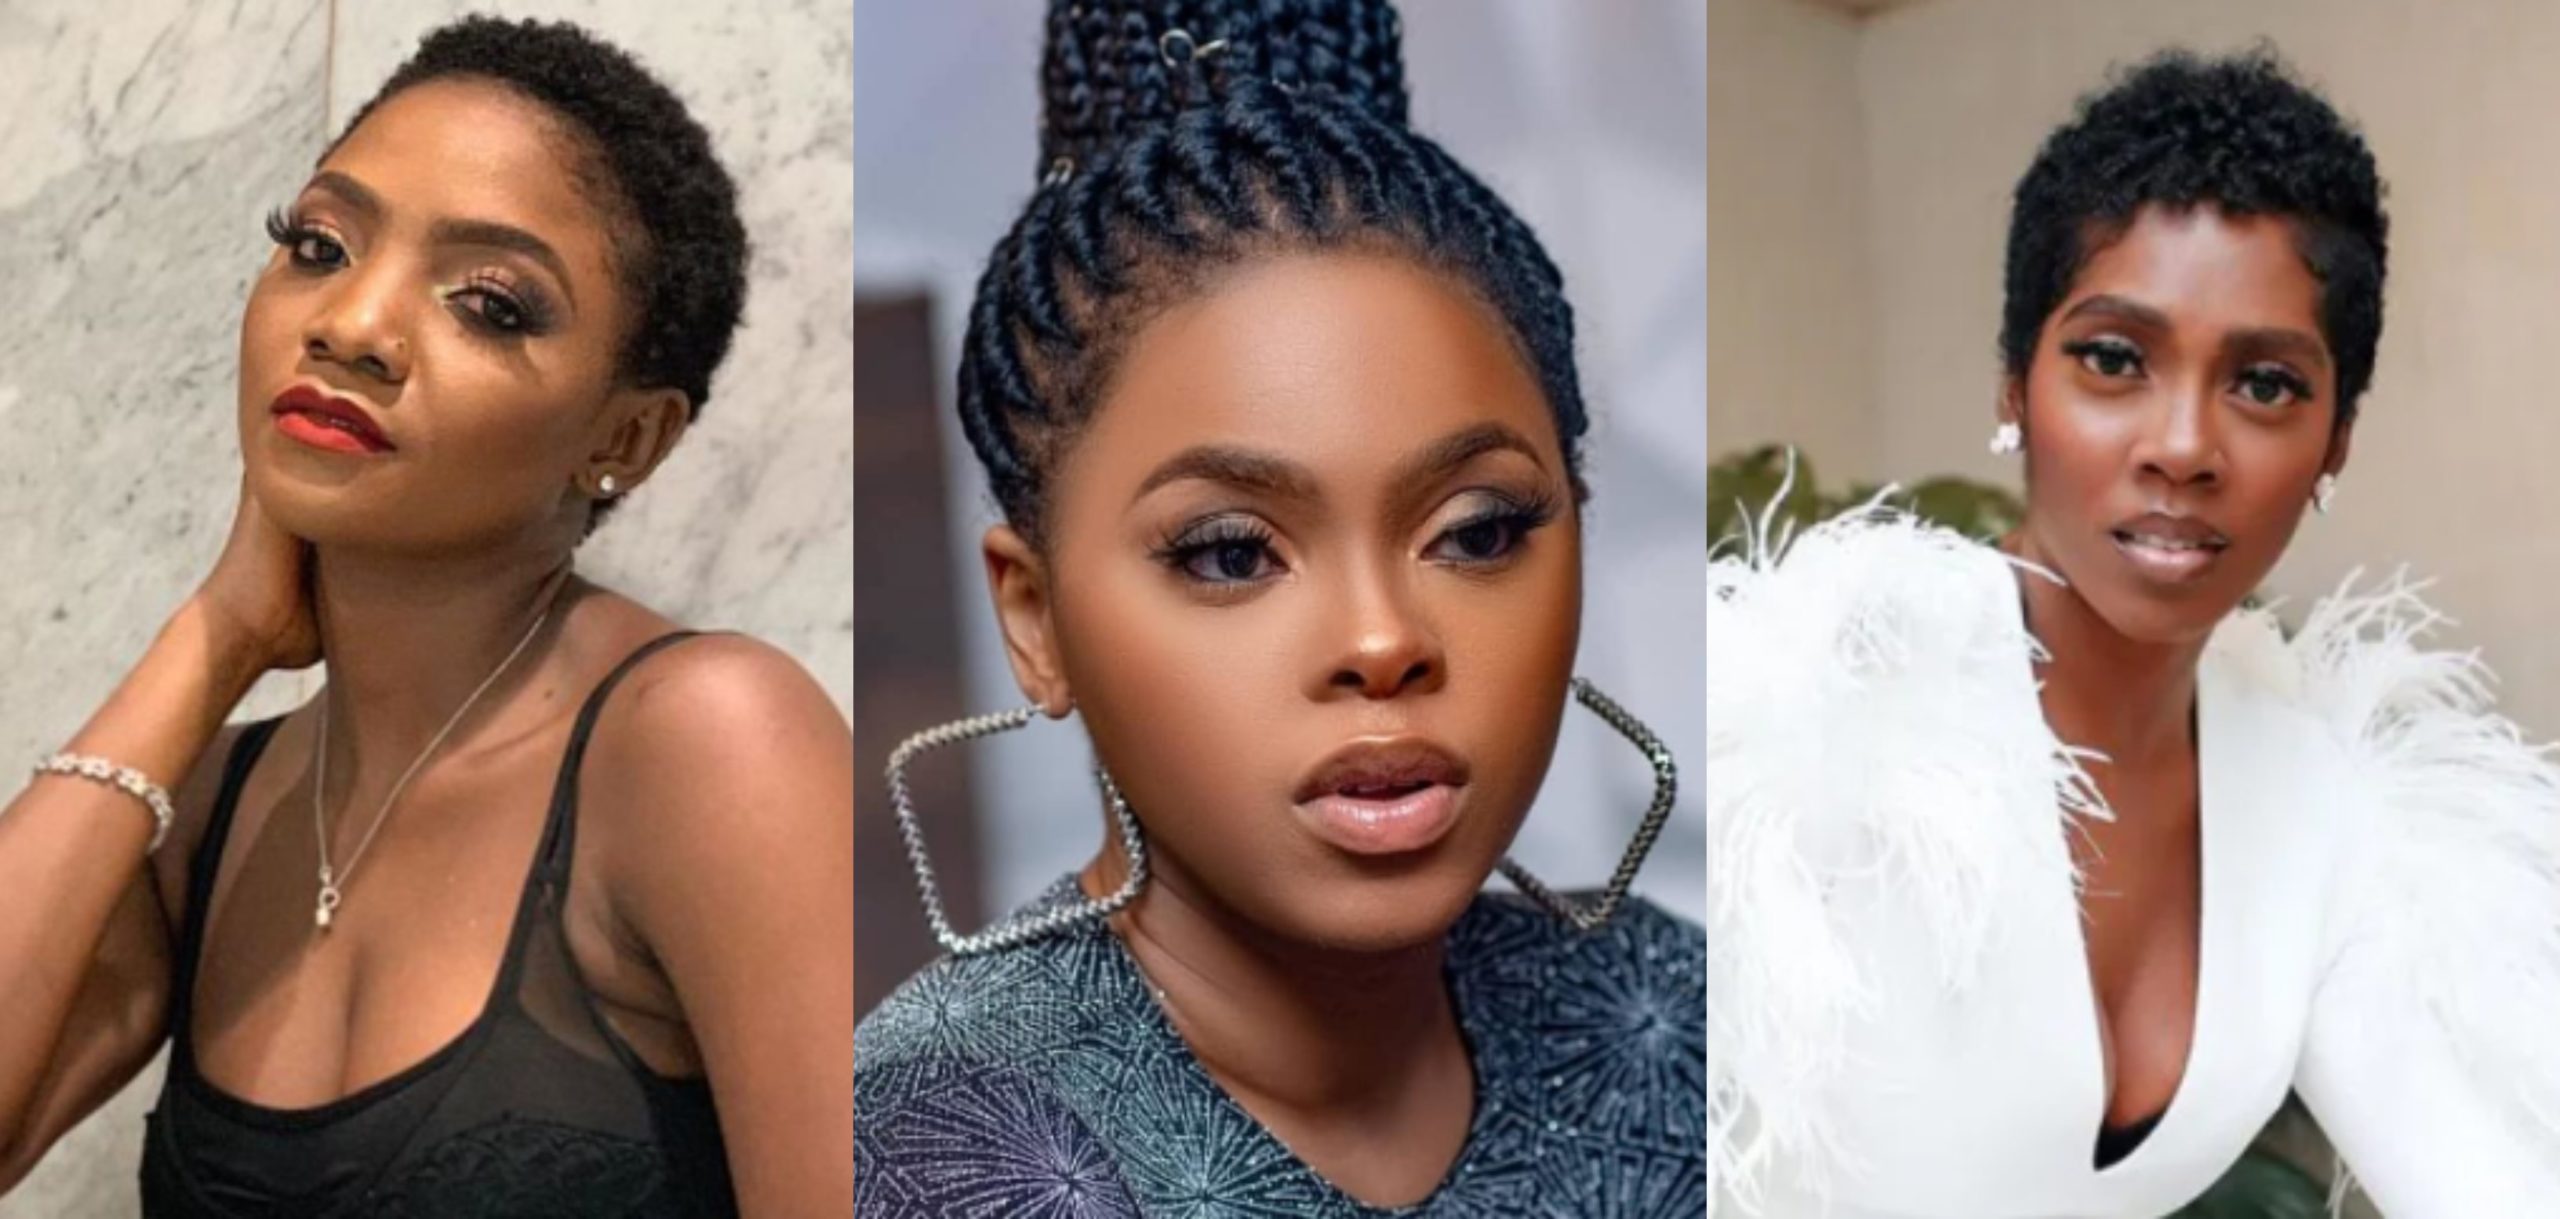 Simi, Tiwa Savage, Others React After Chidinma Announces Switch To Gospel music